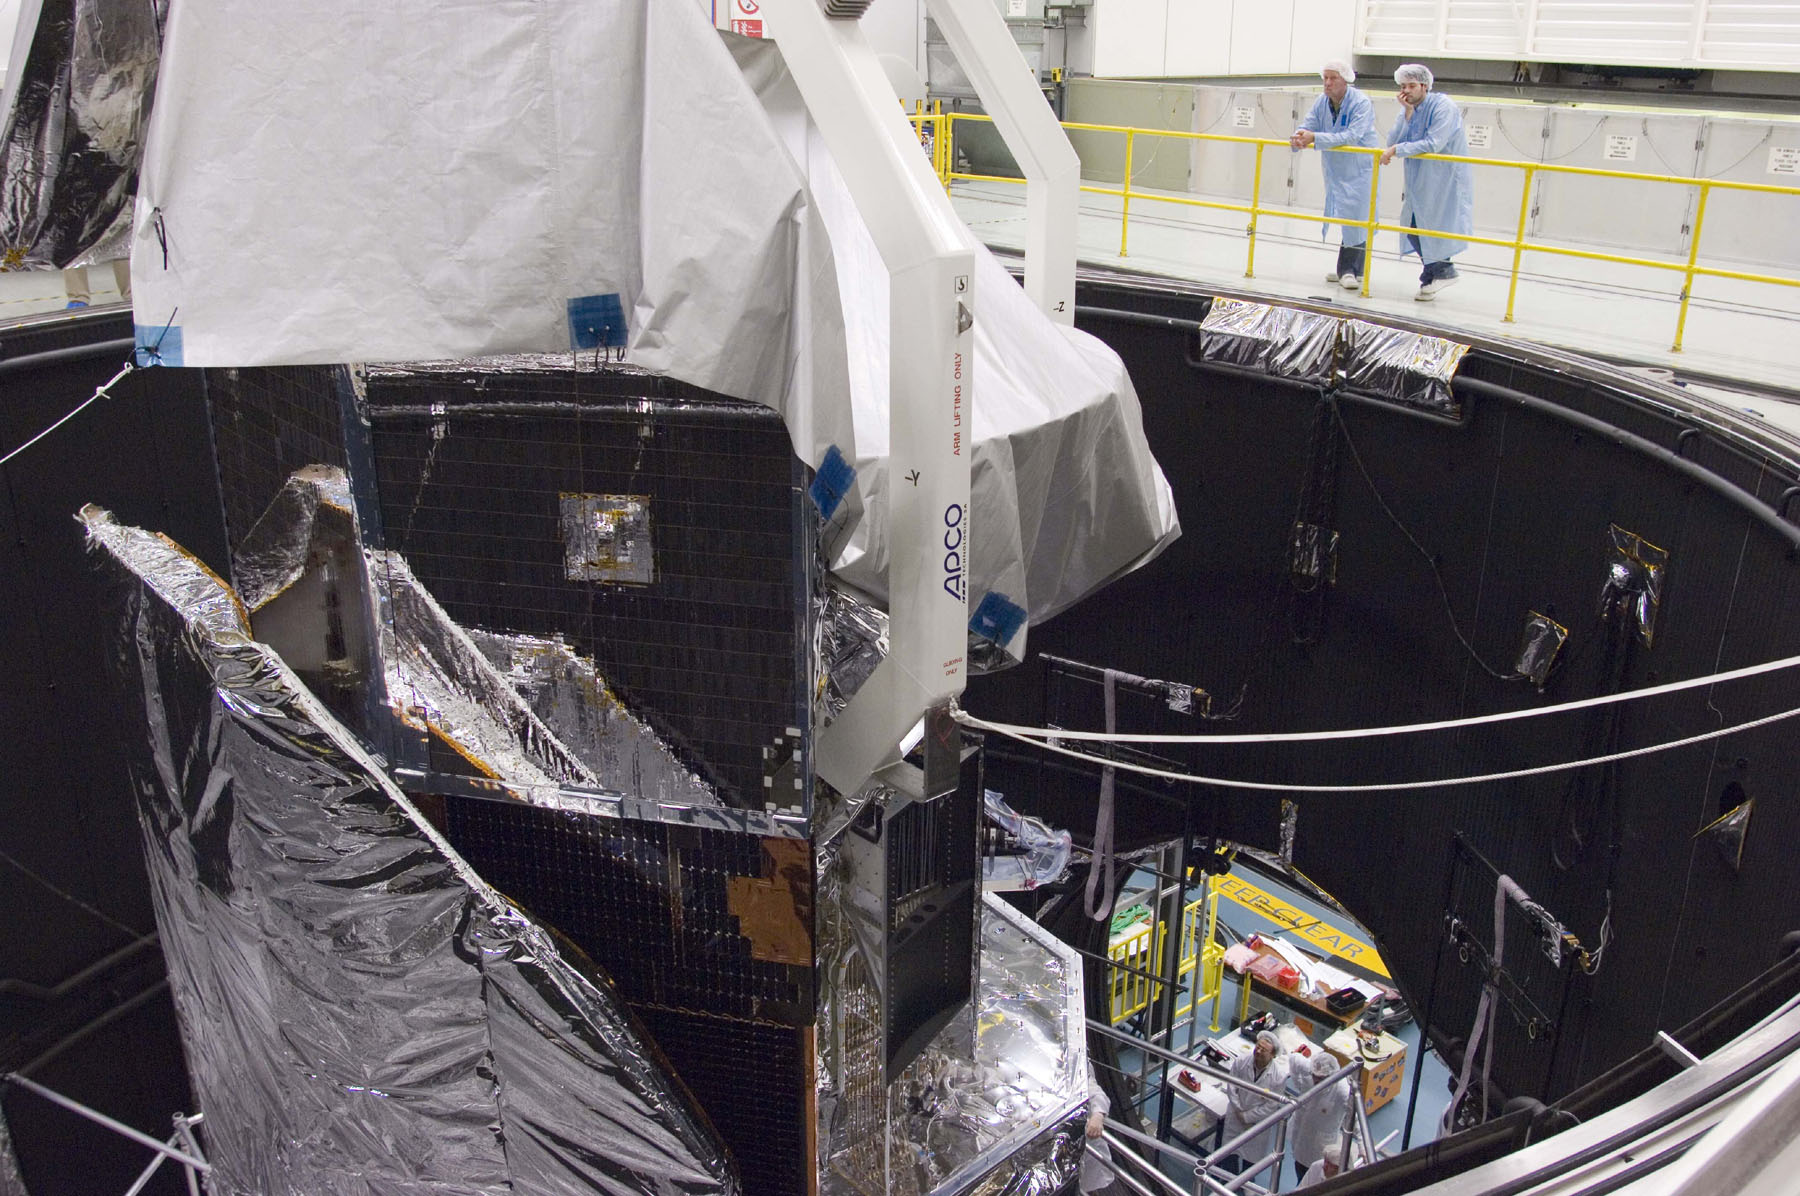 Herschel in the Large Space Simulator (LSS).